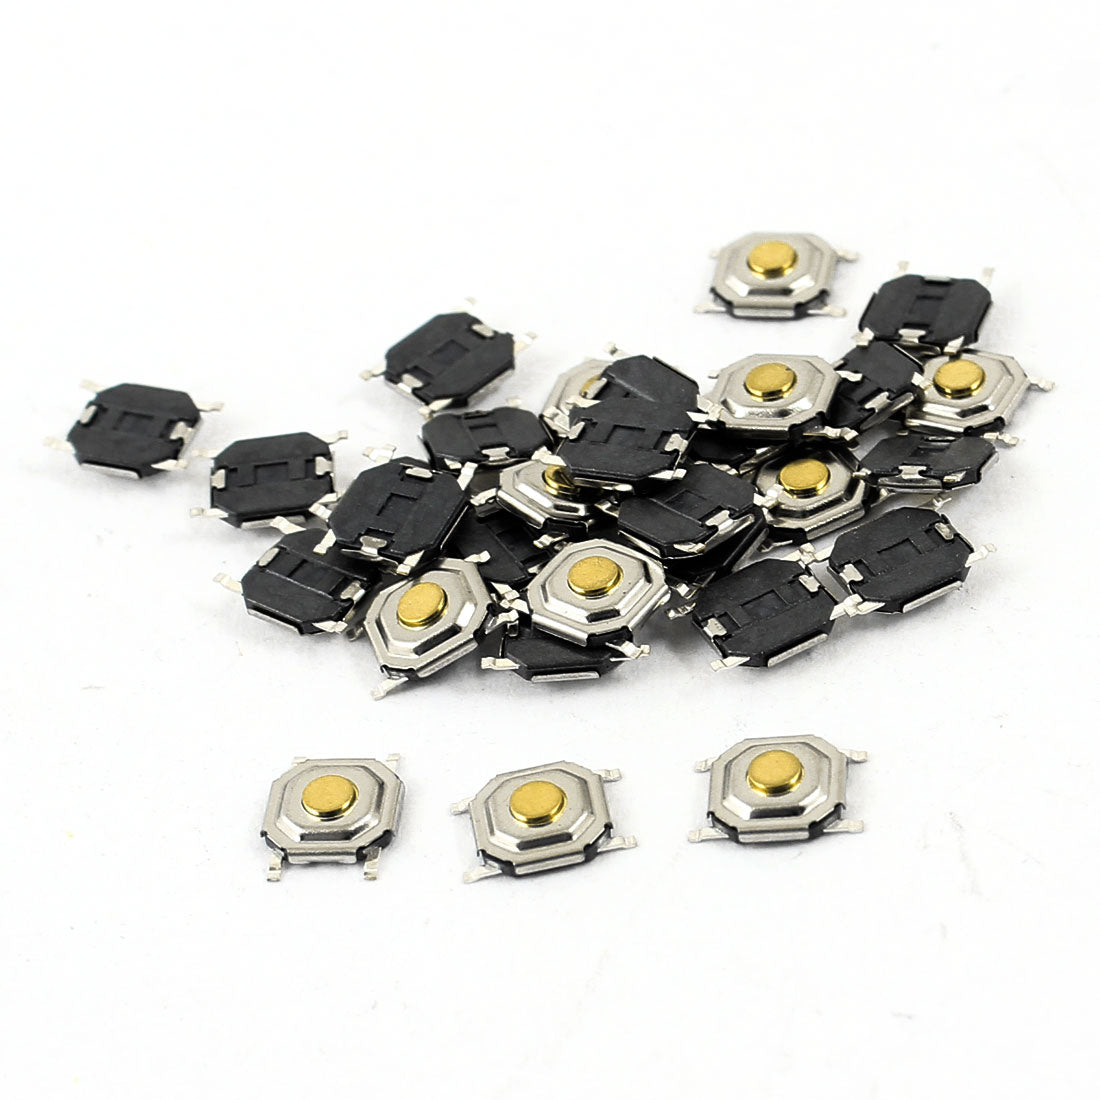 uxcell Uxcell 30pcs Momentary PCB Surface Mounted Devices SMT Mount 4 Pins Round Push Button SPST Tactile Tact Switch 4mmx4mmx1.5mm